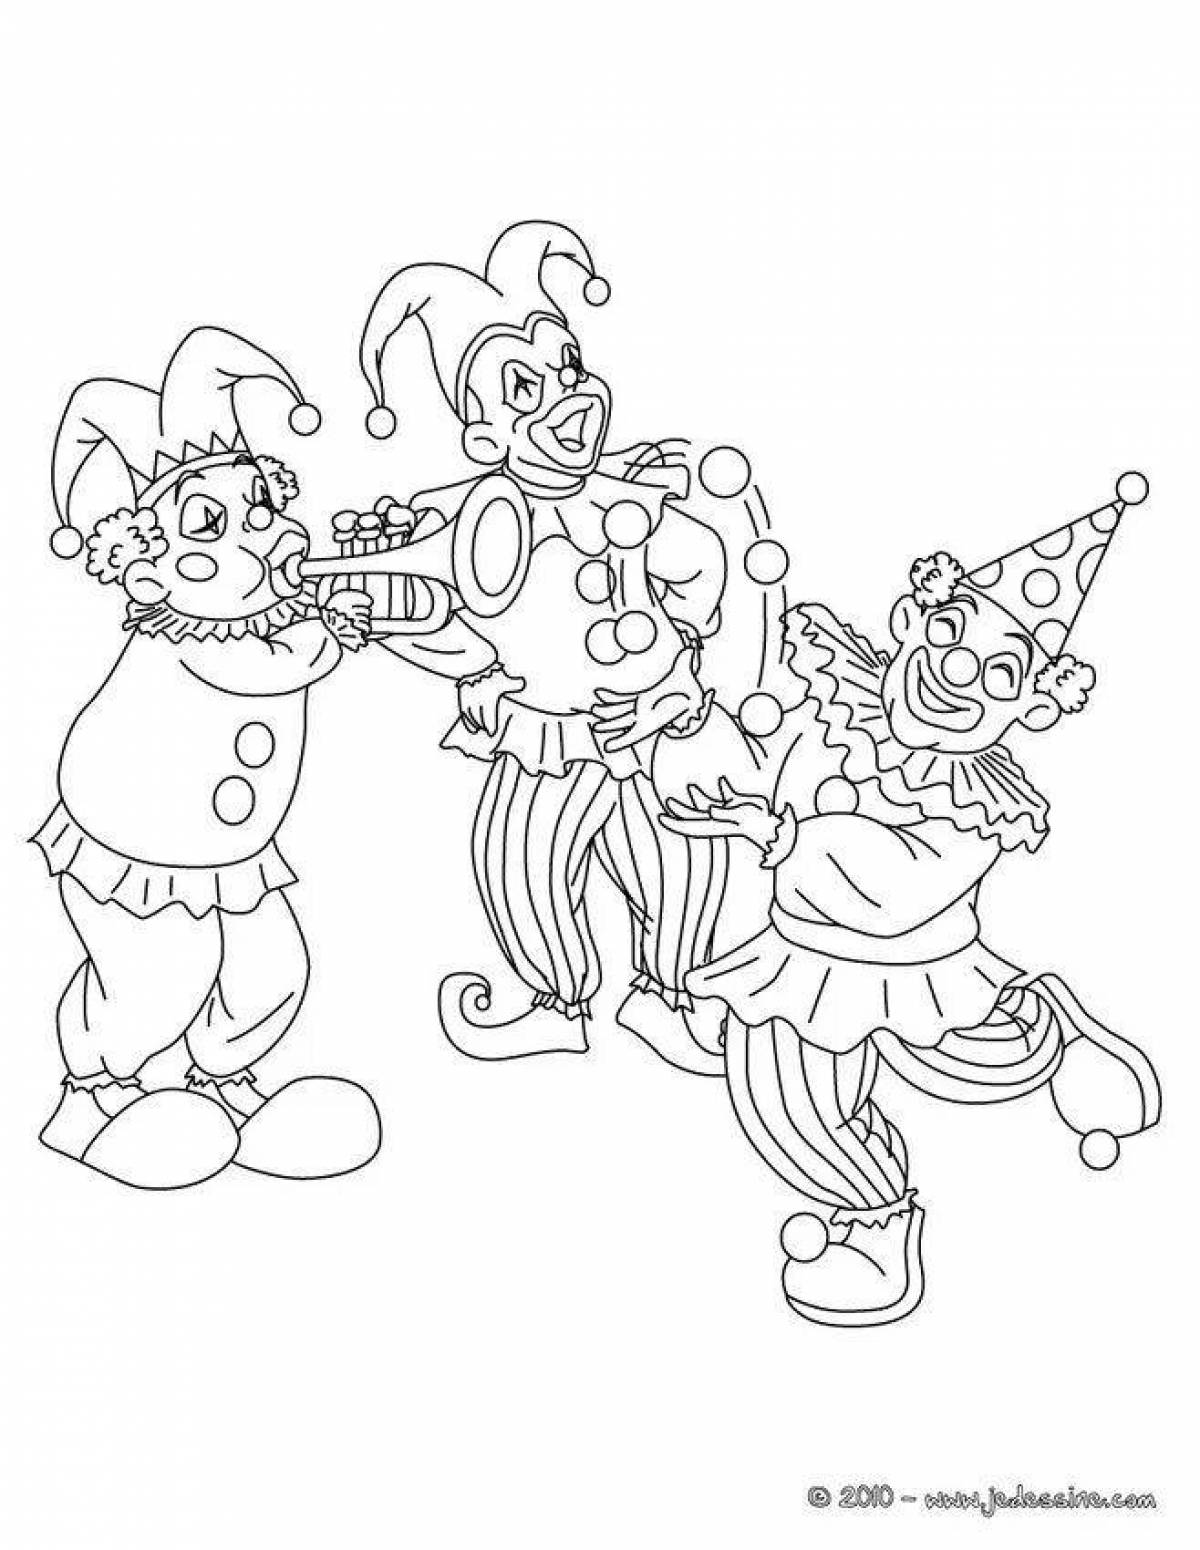 Animated jester coloring page